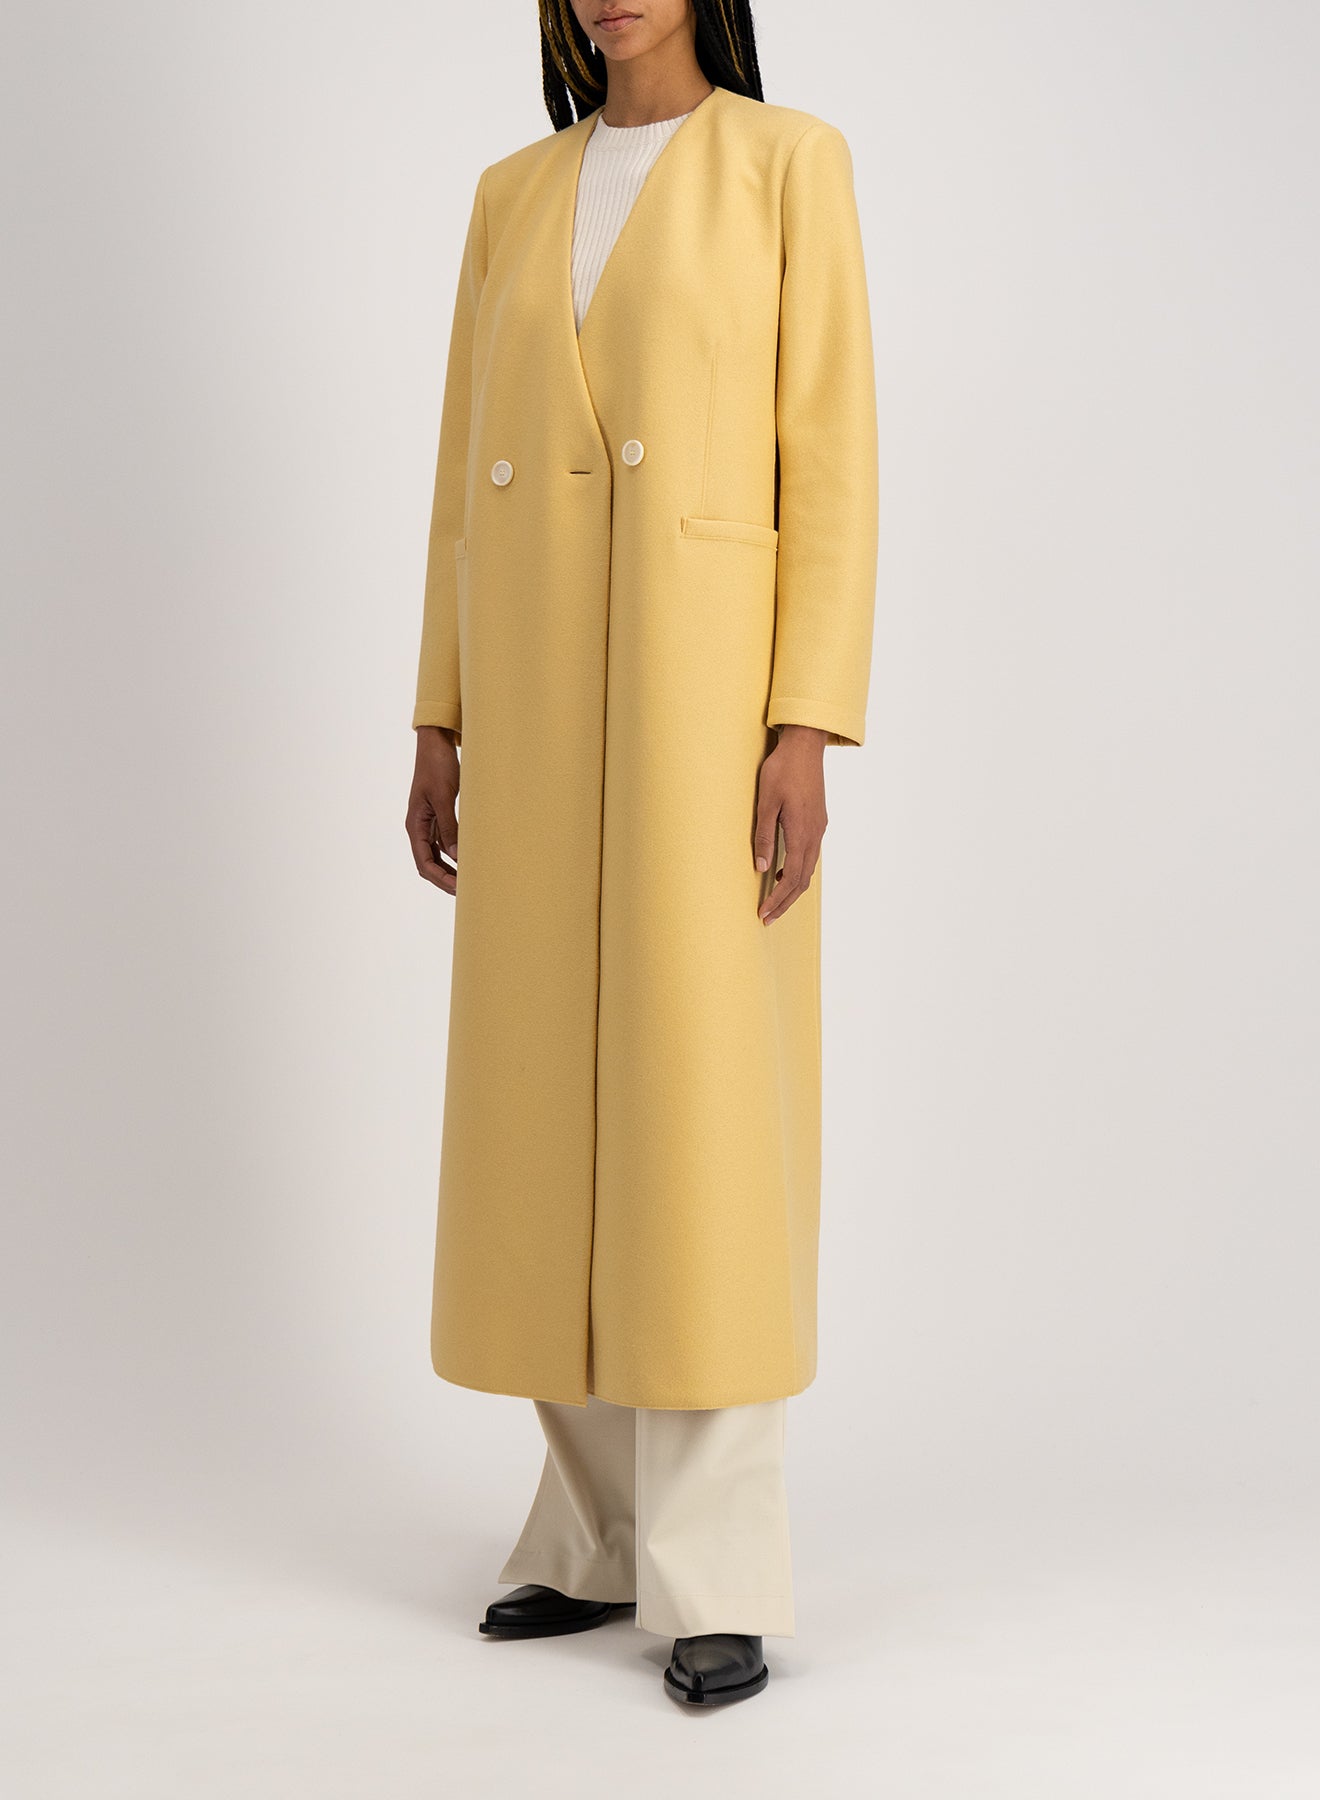 Uncollared coat in light pressed wool